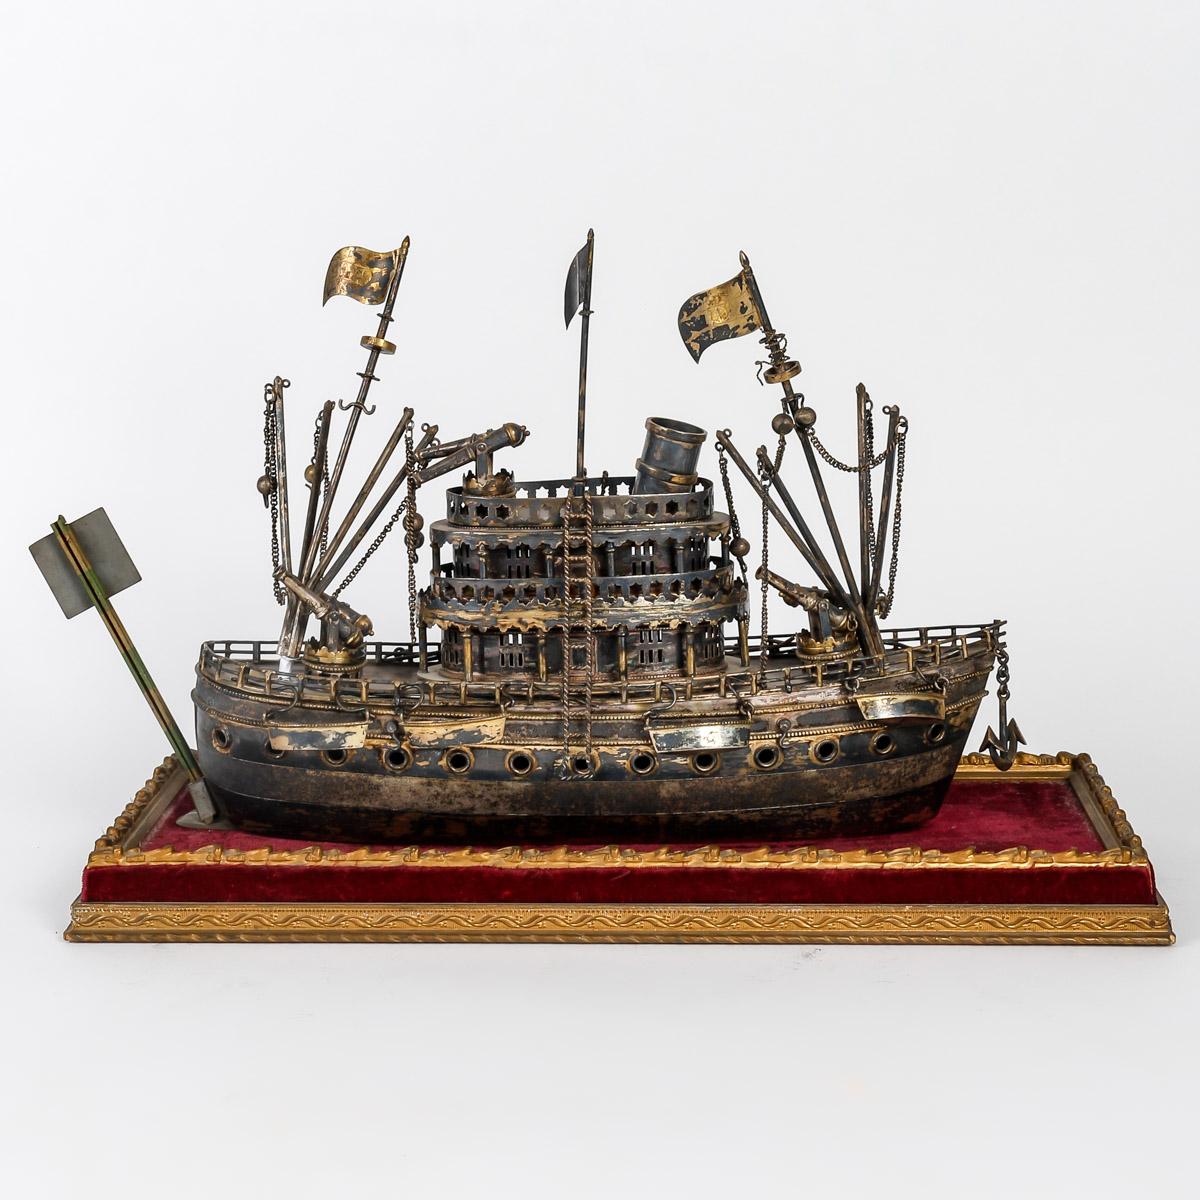 Napoleon III Miniature Army Boat in Sterling Silver, 19th Century, English Work. For Sale